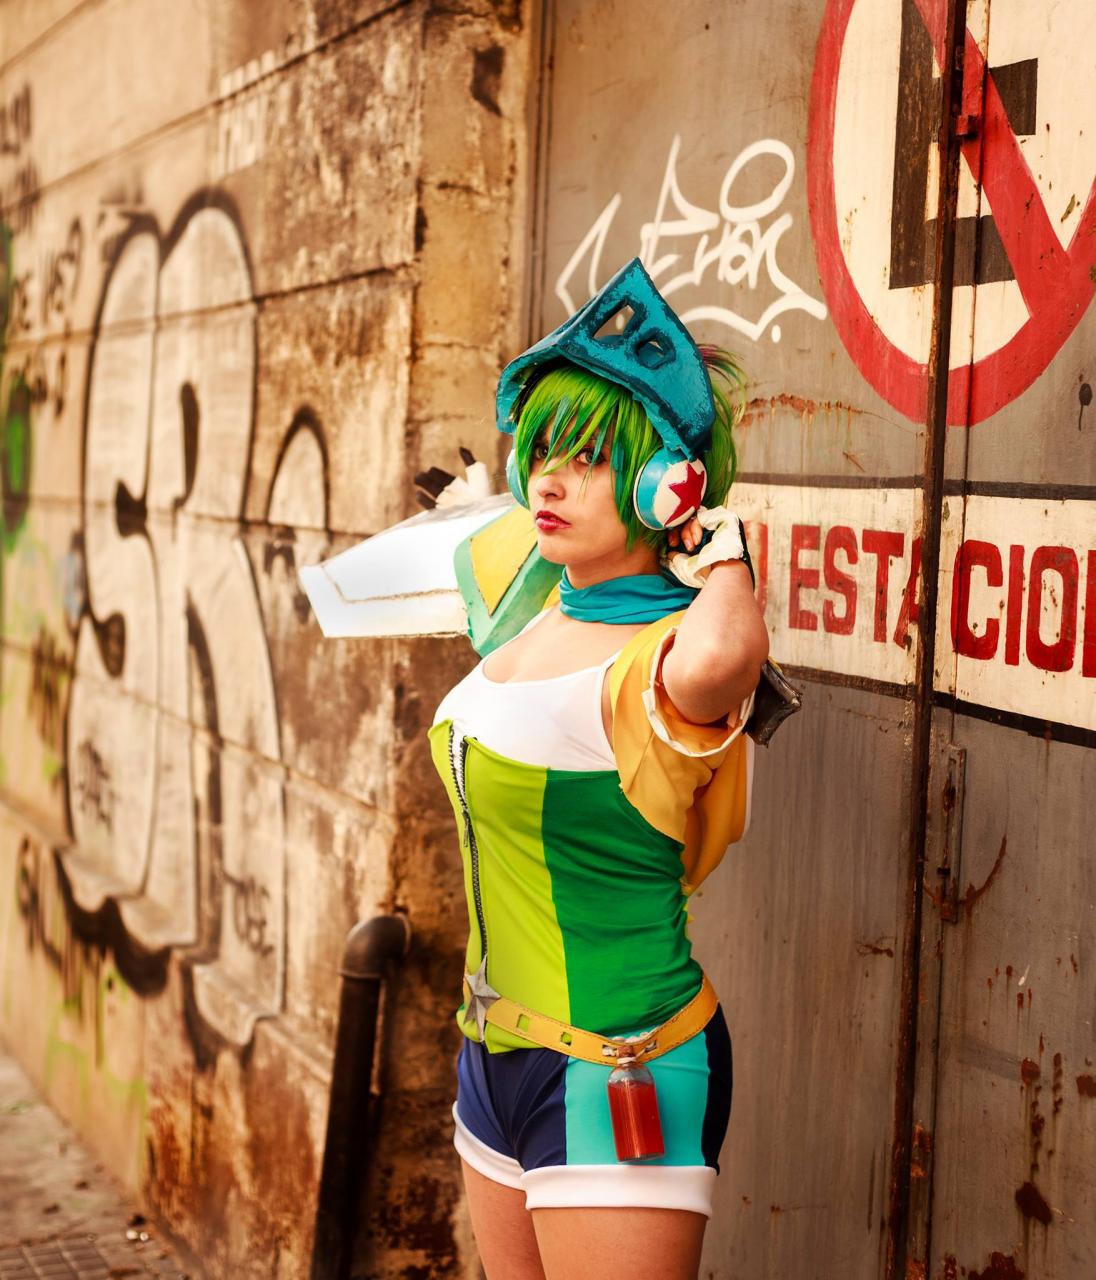 20 Fabulous League of Legends Cosplay